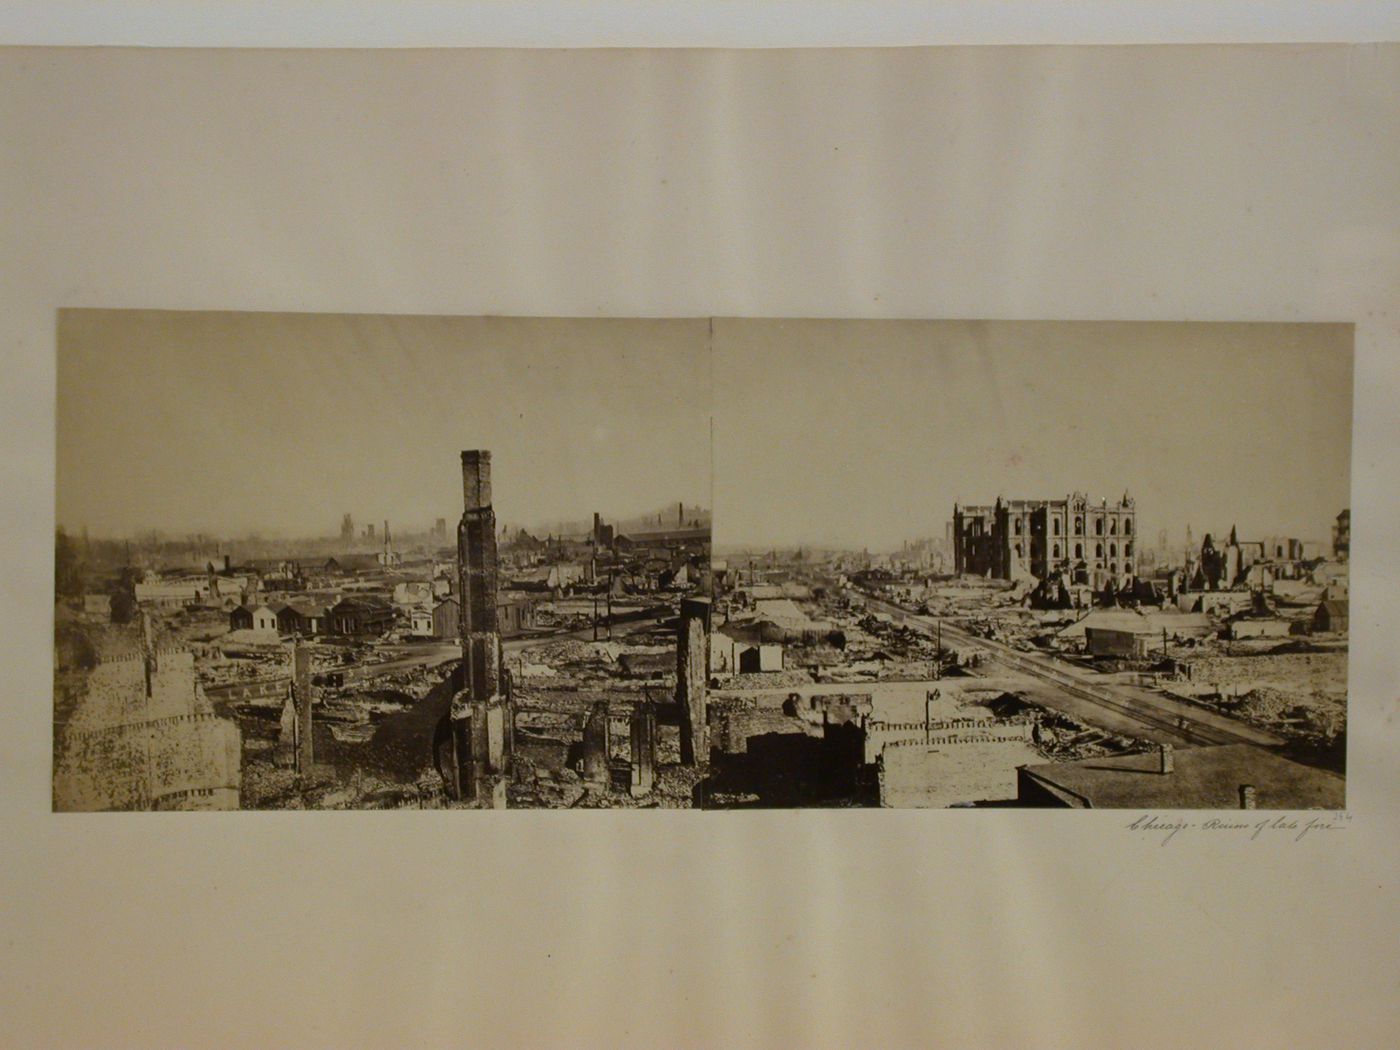 Ruins of lake fire, panorama, showing Randolph and Lake Sts., Chicago, Illinois